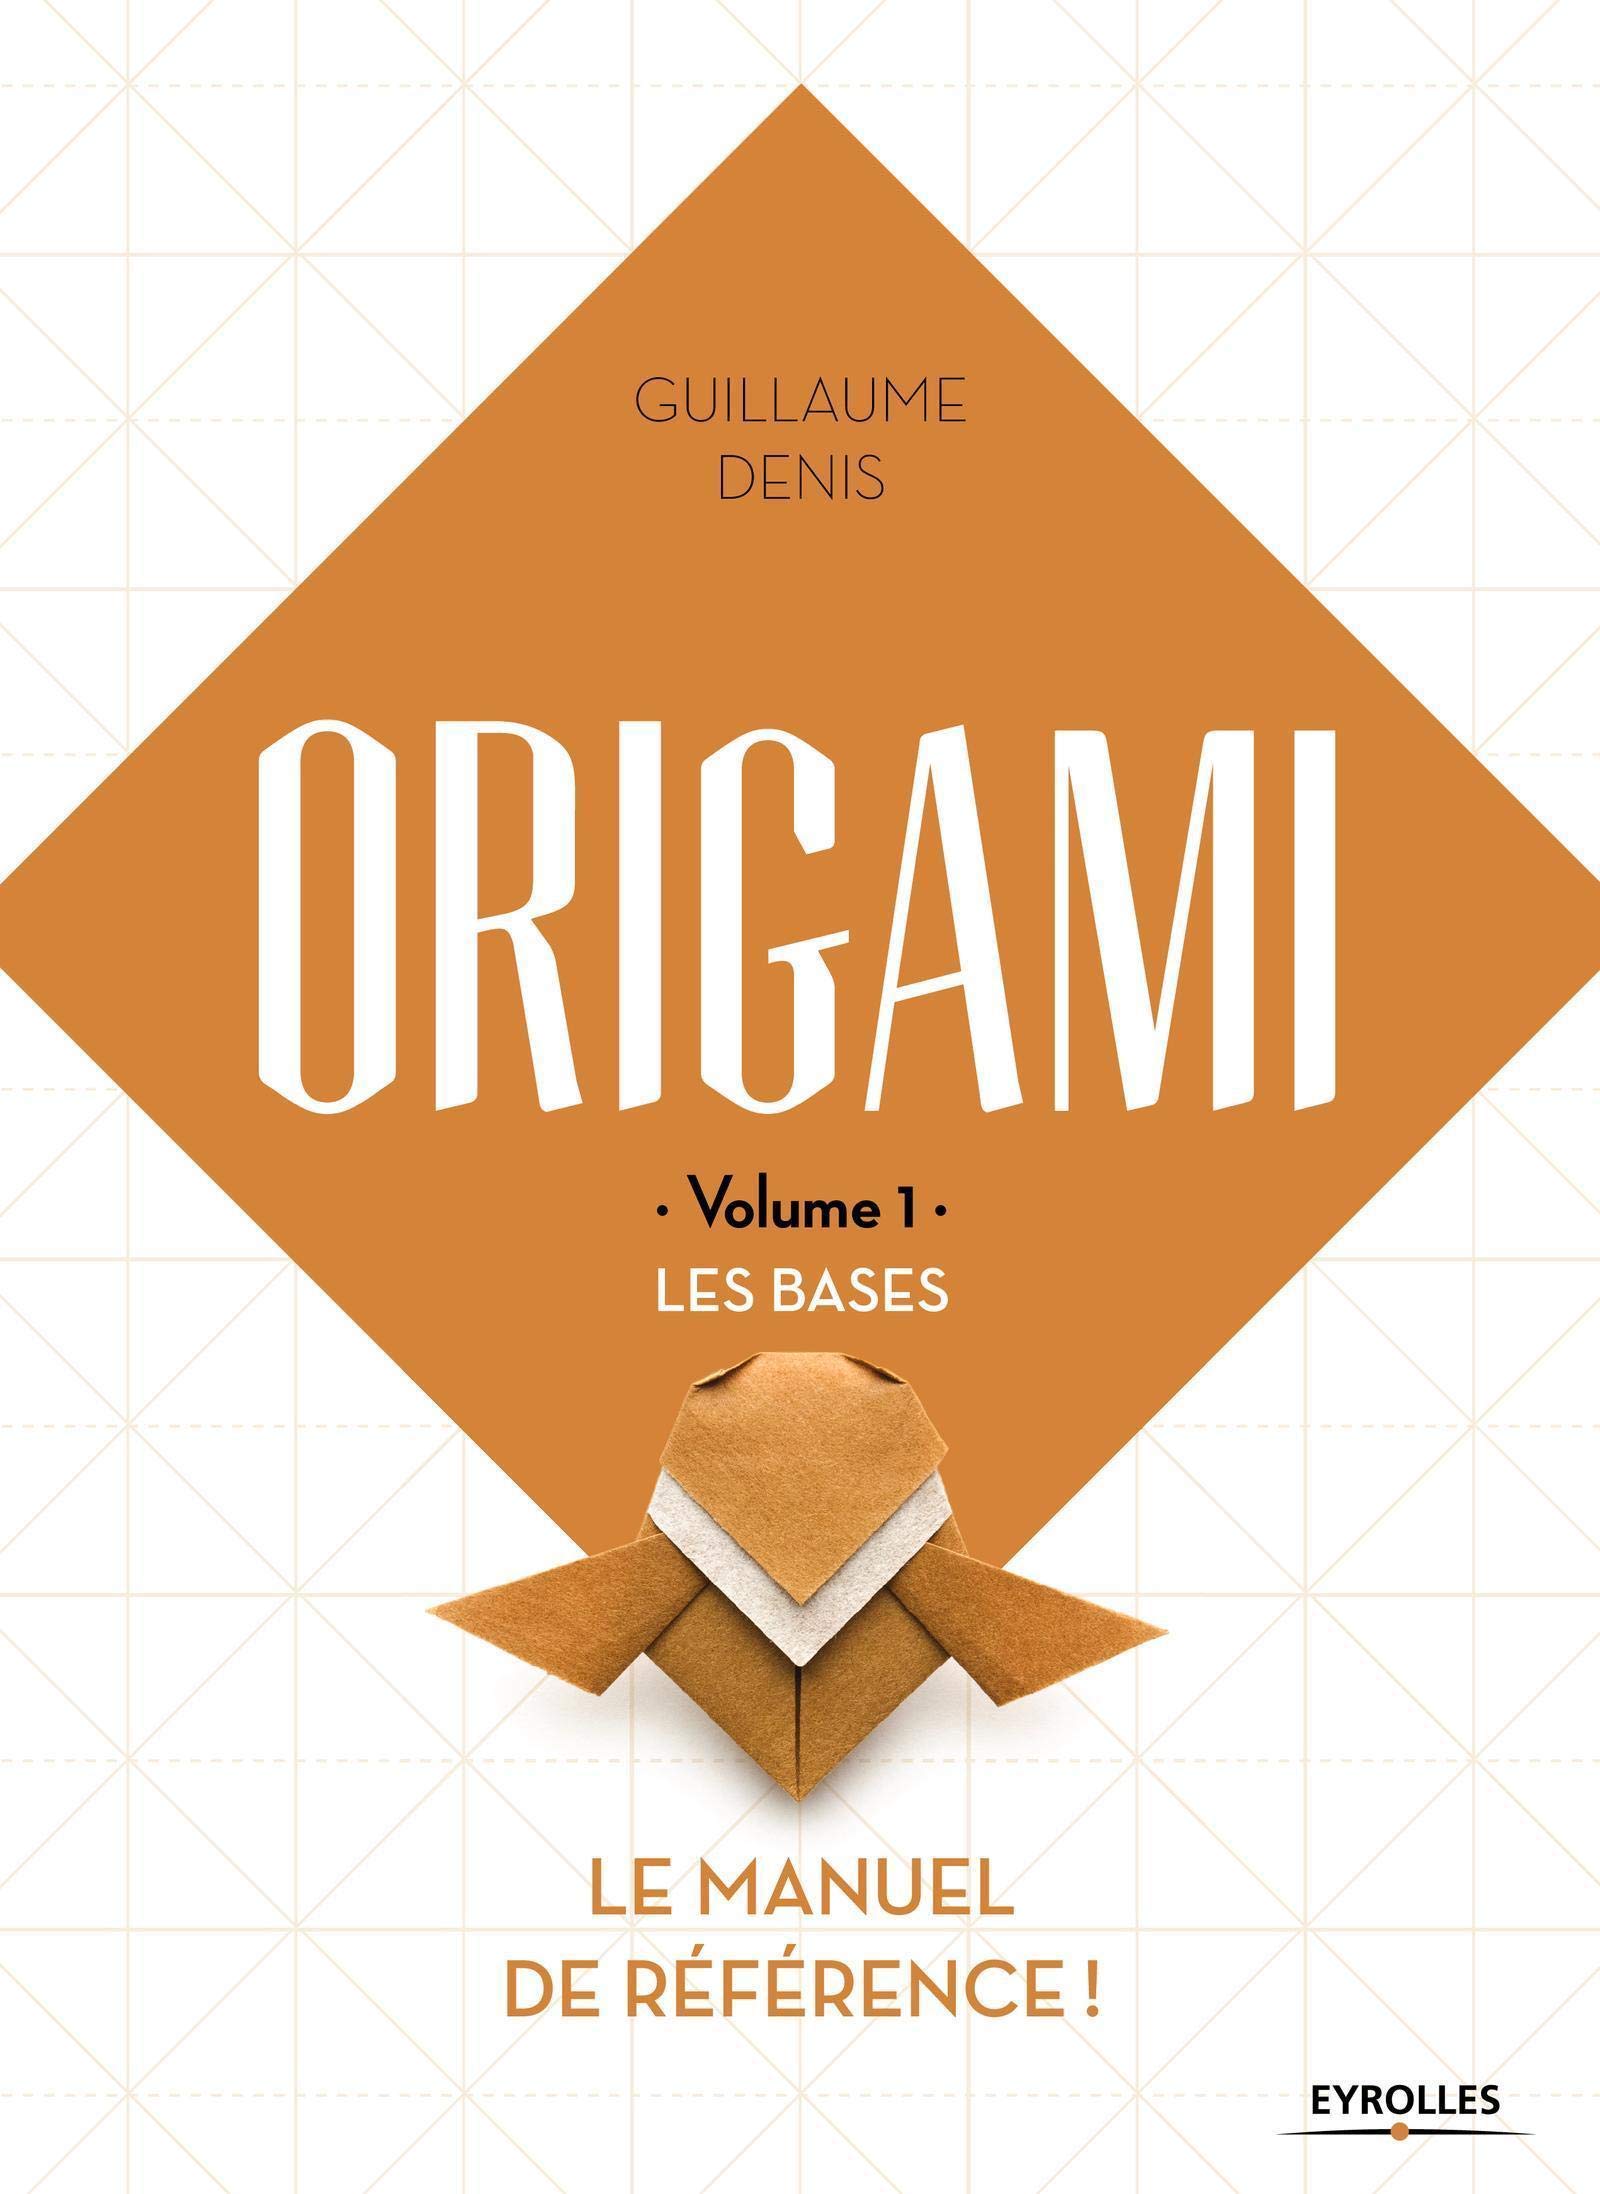 ORIGAMI - Volume 1 - LES BASES : page 246.